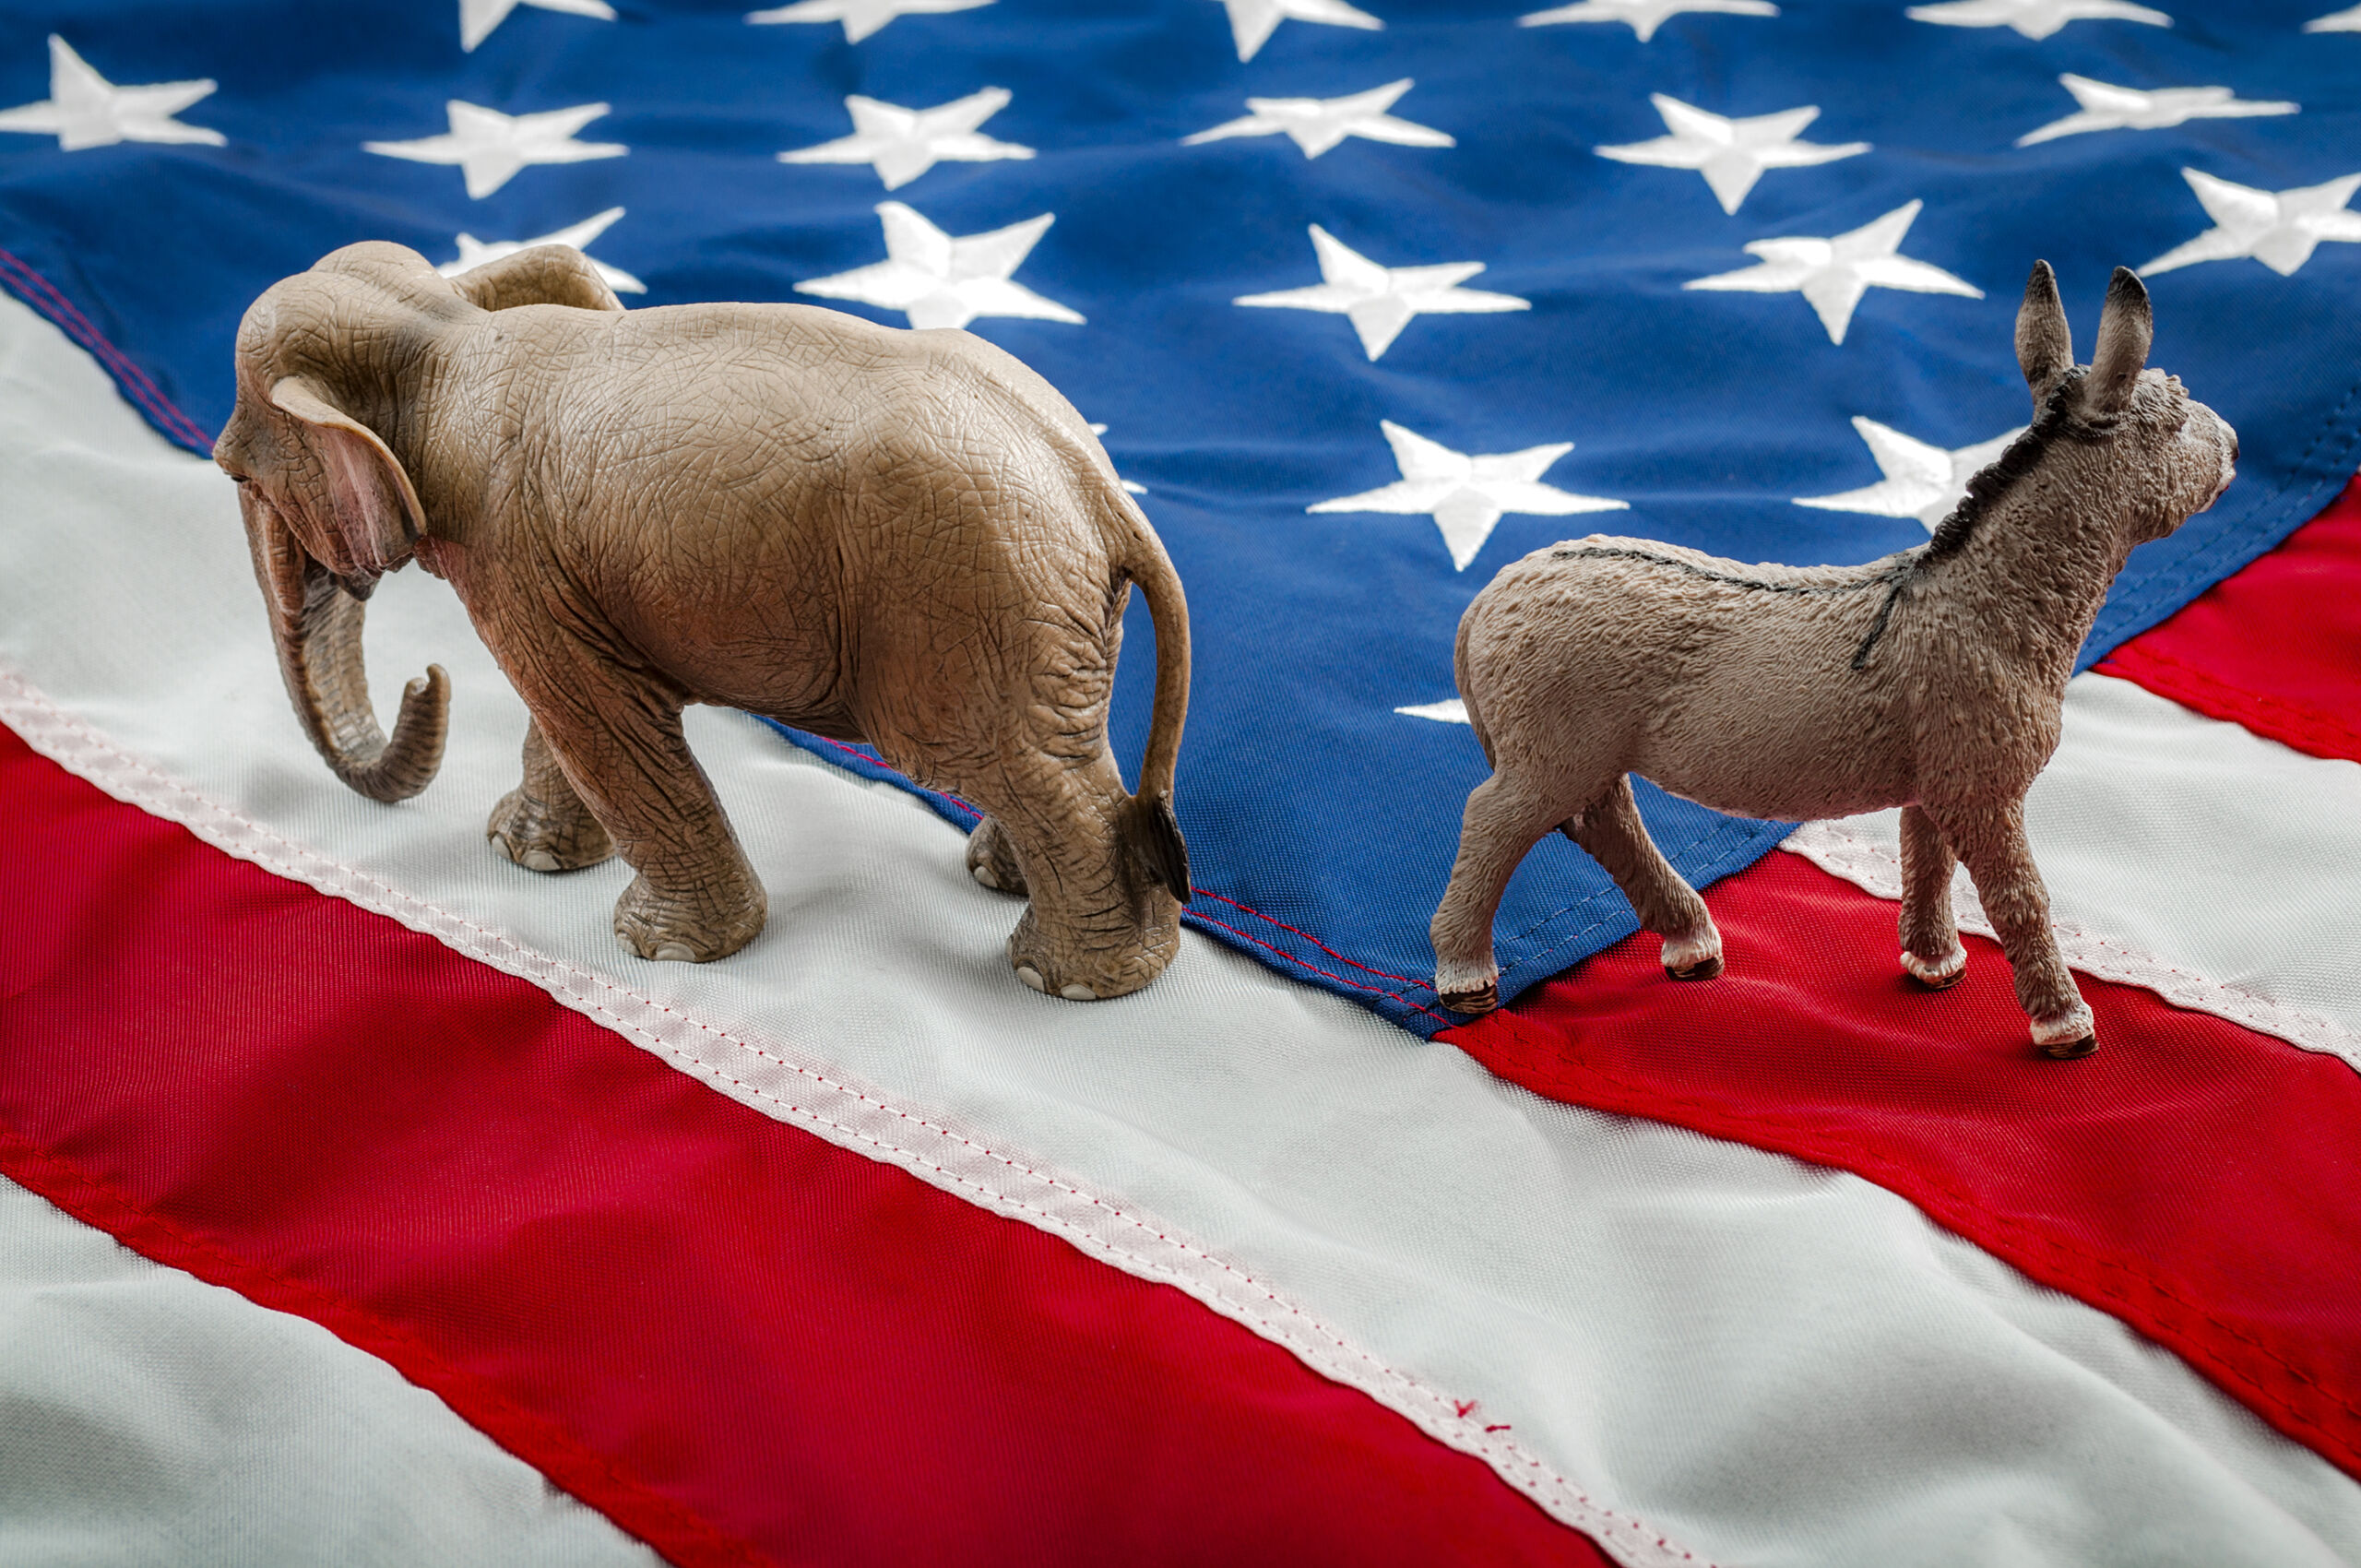 Partisan politics of the democrats and republicans are creating a lack of bipartisan consensus. In American politics US parties are represented by either the democrat donkey or republican elephant